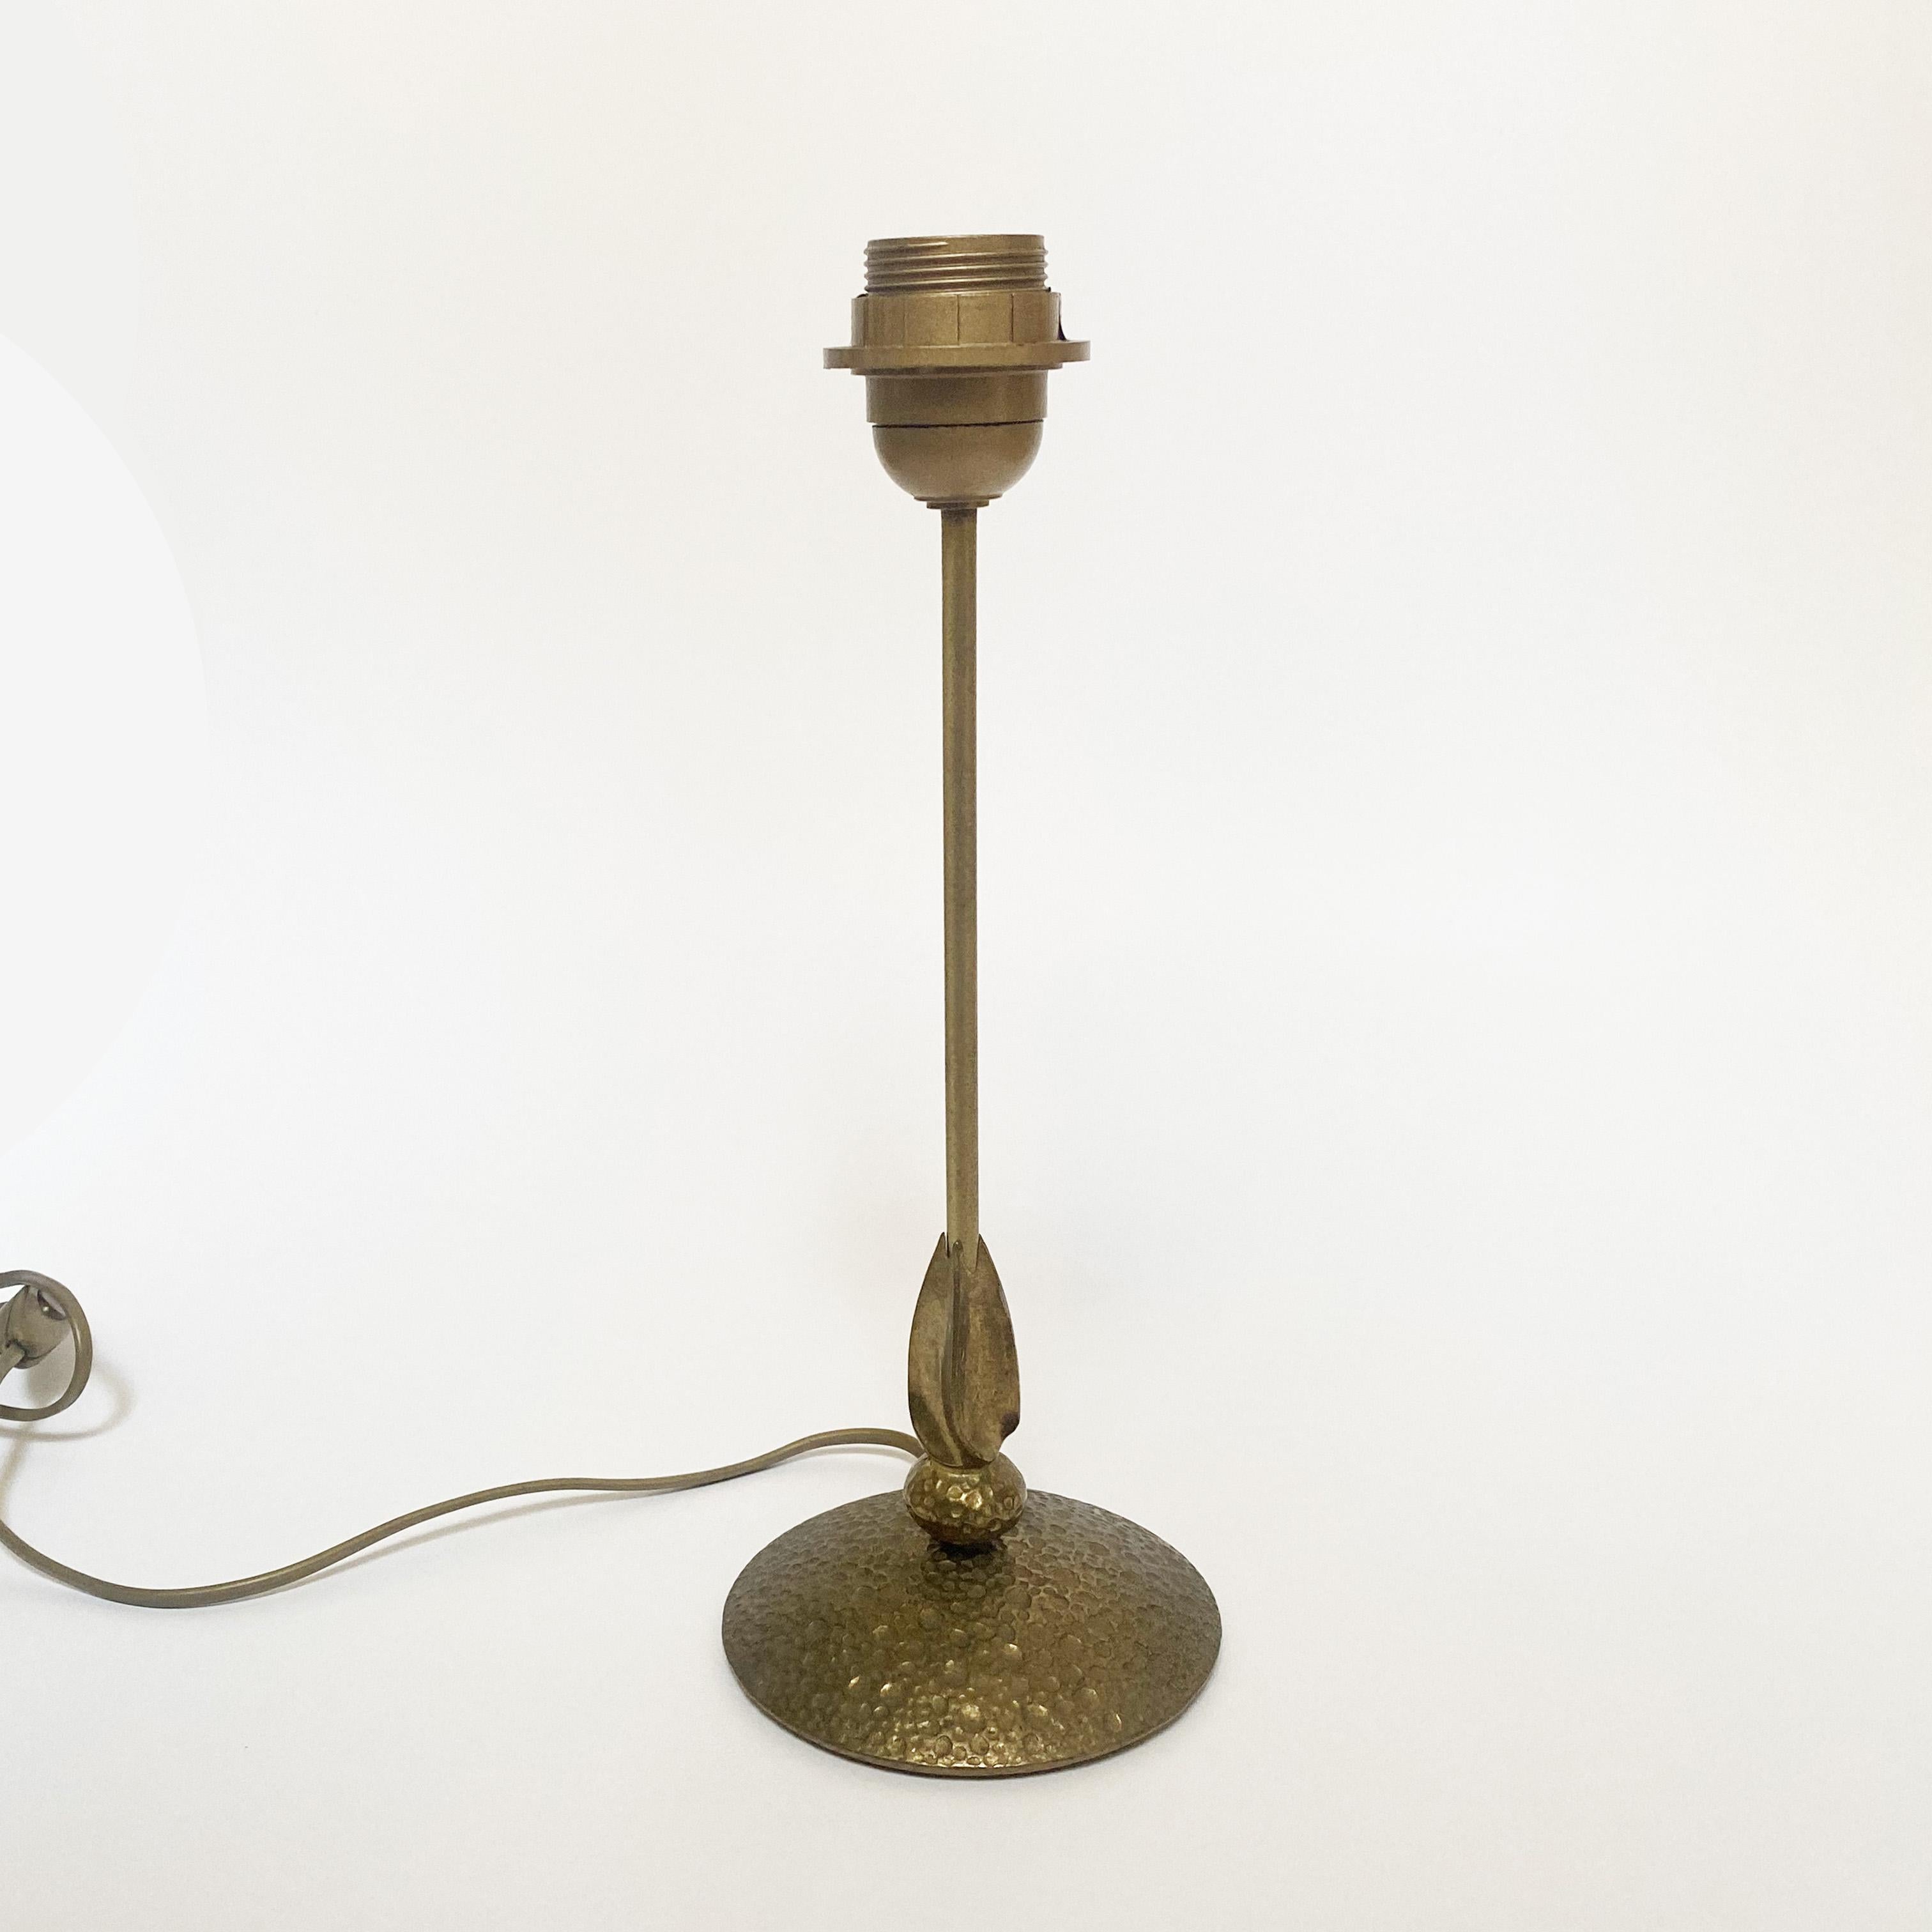 Sculptural brass lamp in the style of Fondica or Lucien Gau, France, 1990s.

Height: 35 cm.